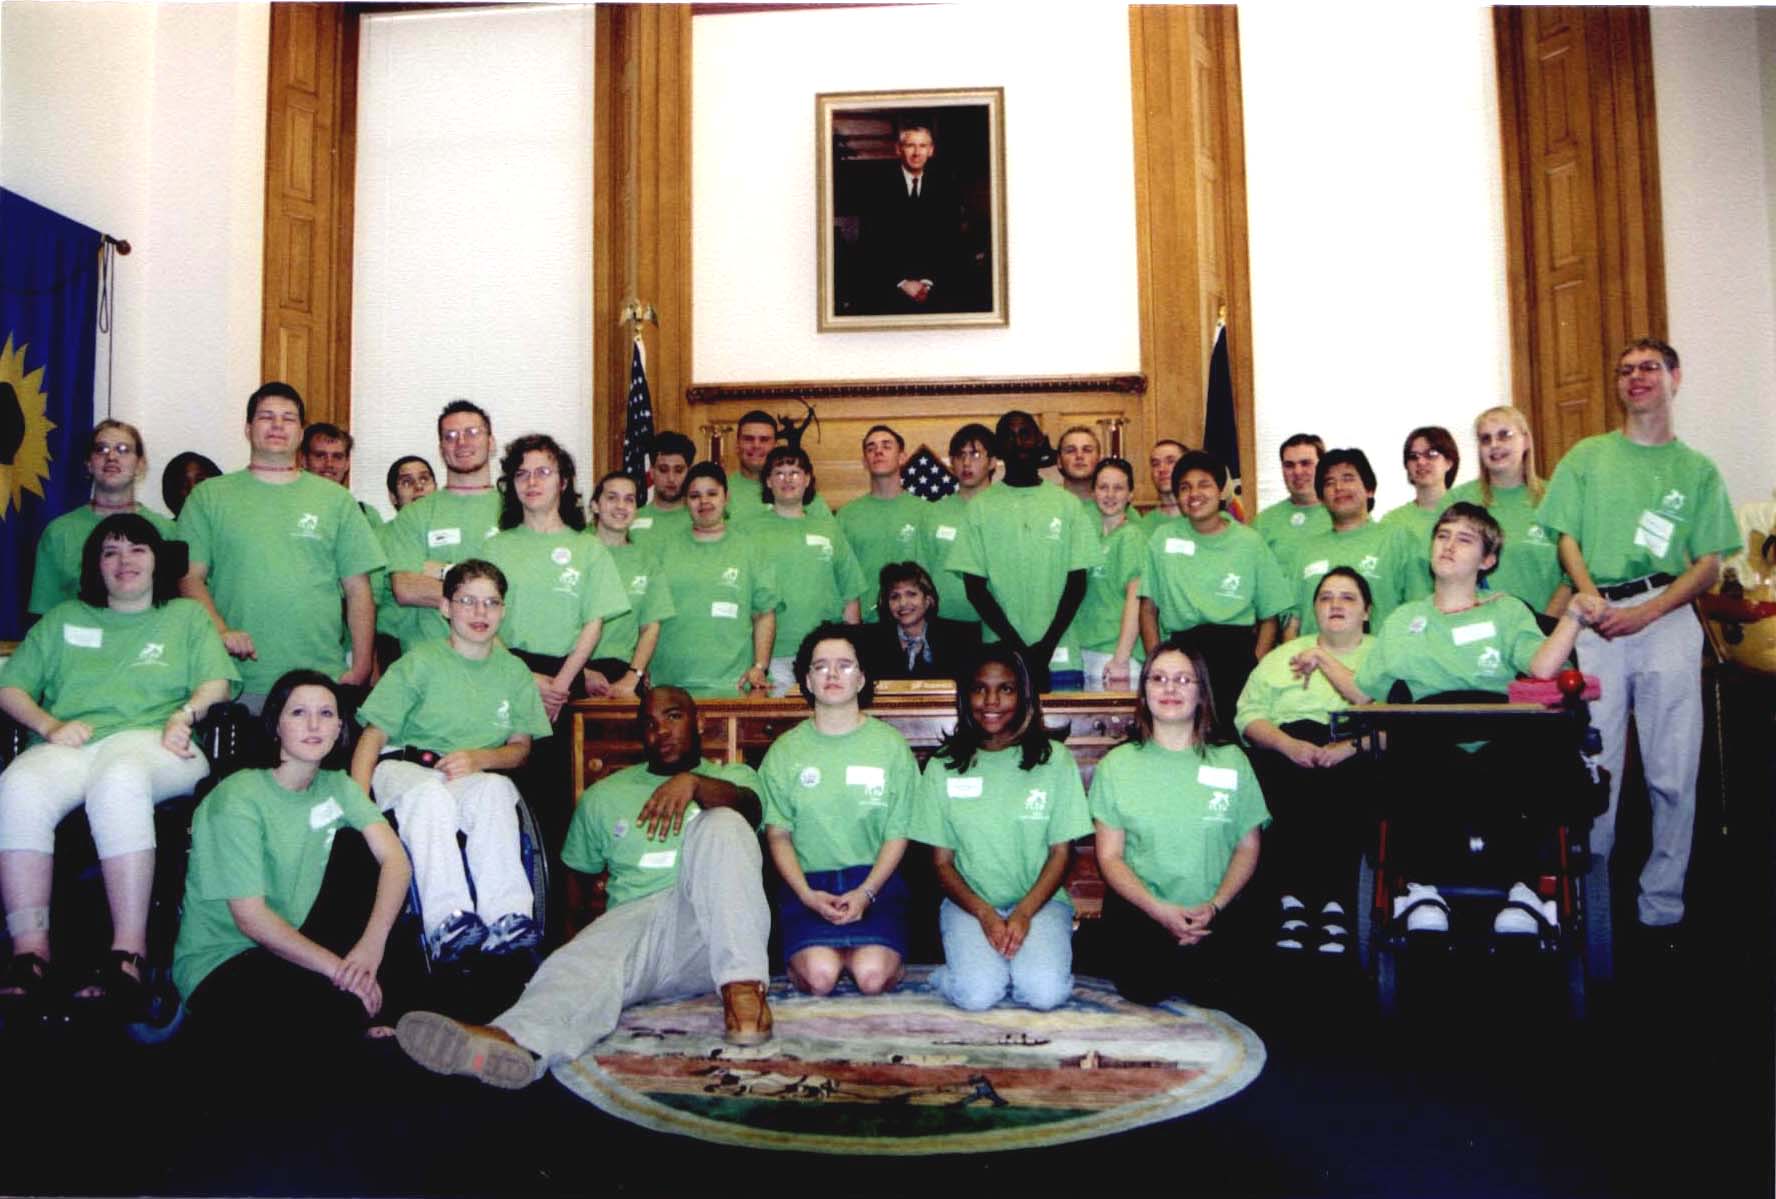 2002 delegates in the Governor's office of Capital